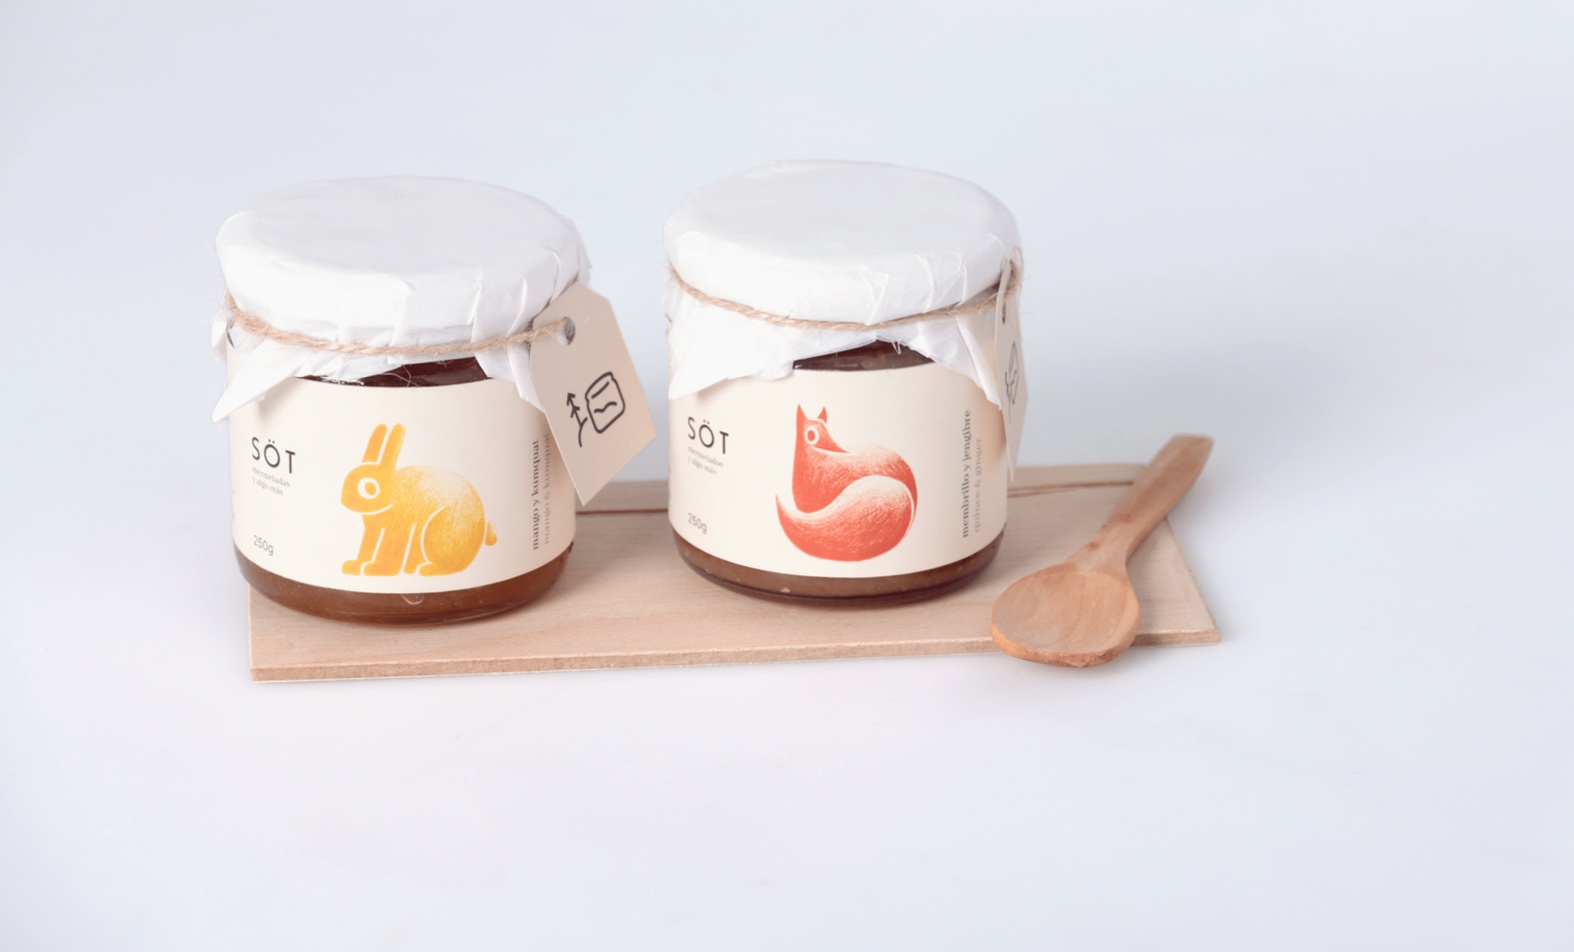 Söt’s Jam Branding And Packaging Is Light And Airy